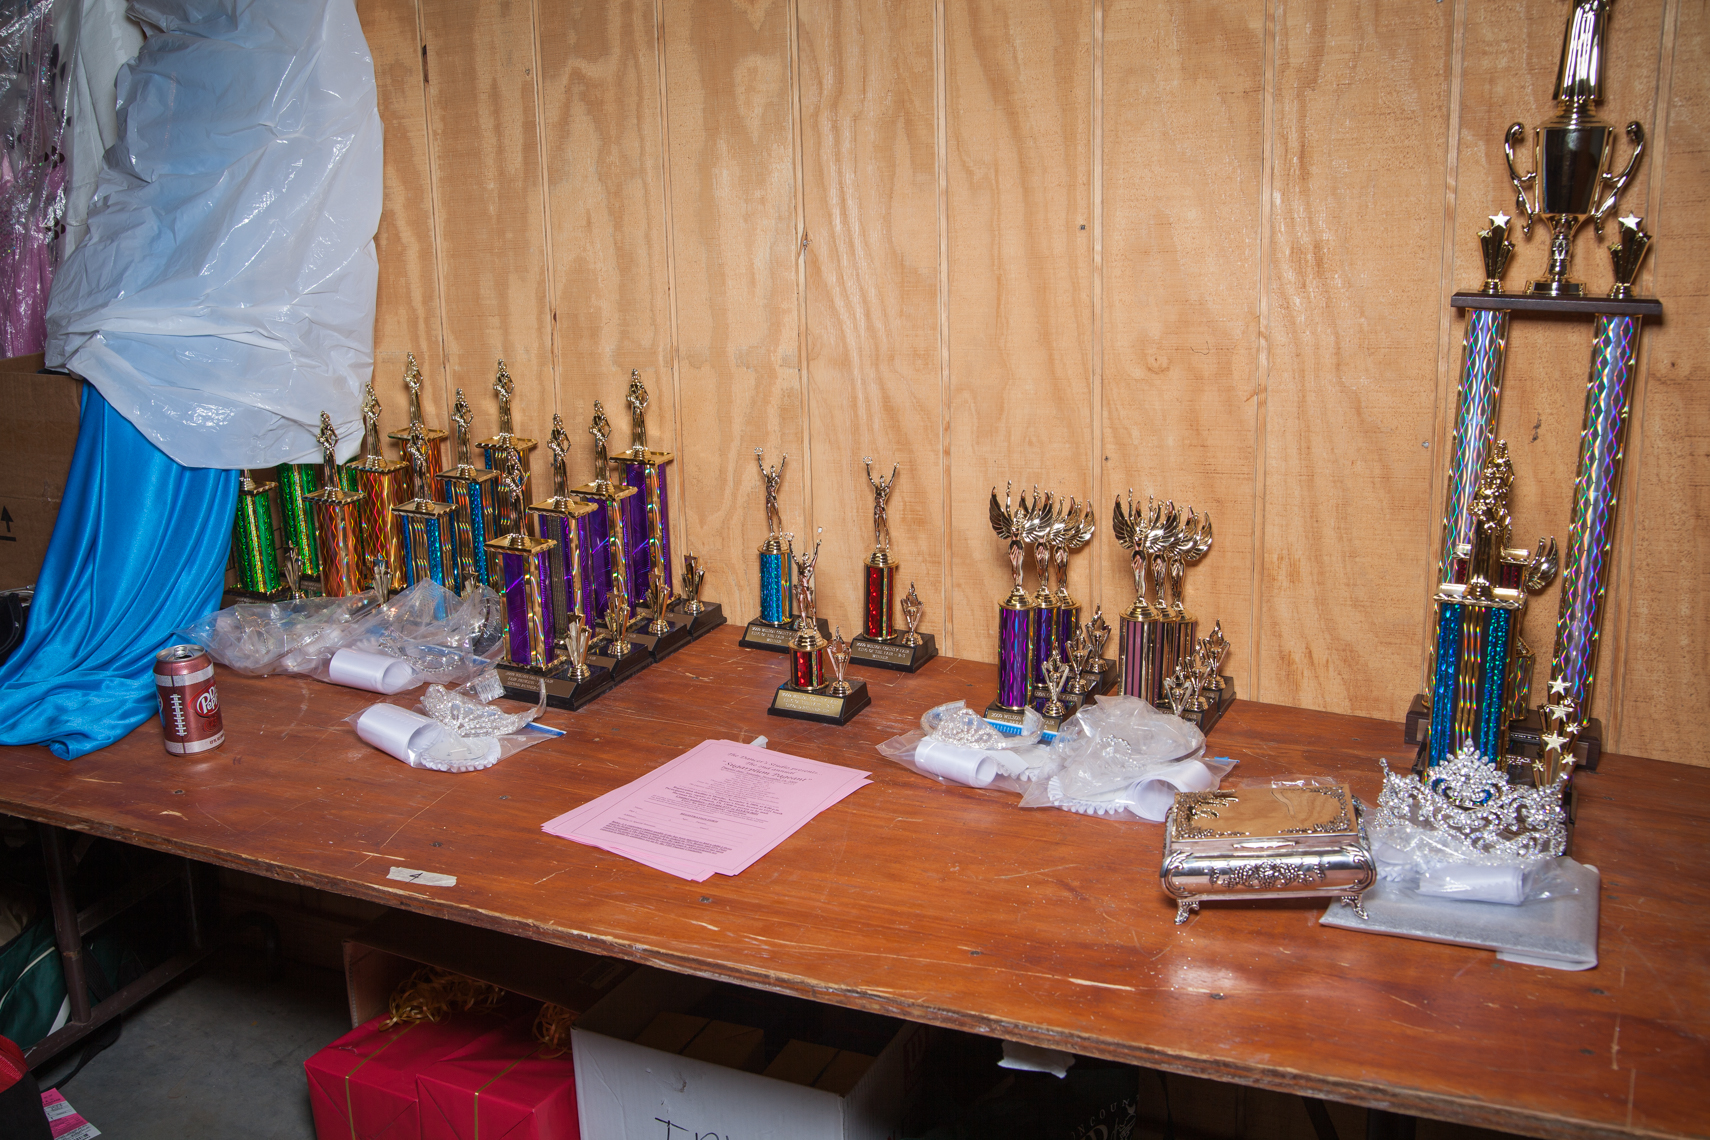 Beauty patent and talent show contest trophies, Wilson County Fair, Lebanon, Tennessee